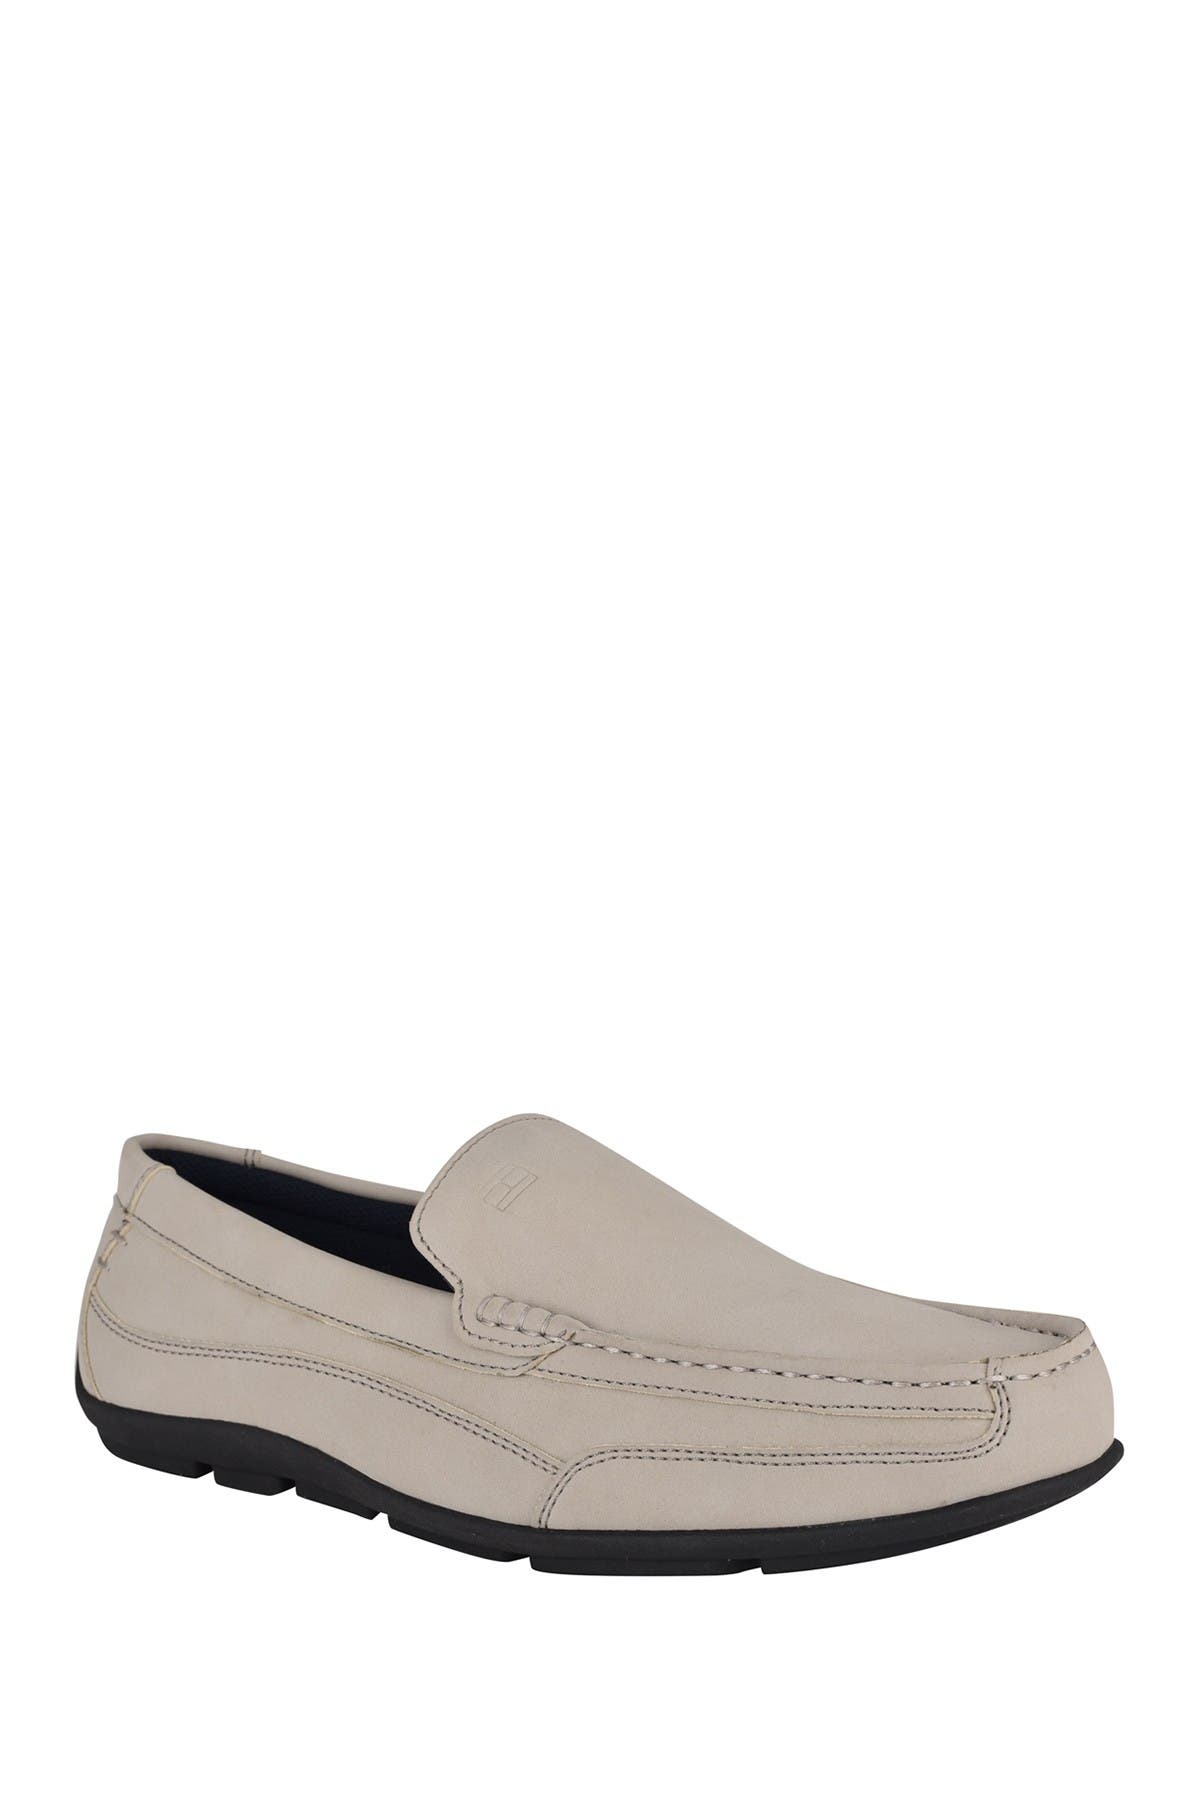 Men's Loafers \u0026 Slip-Ons Clearance 